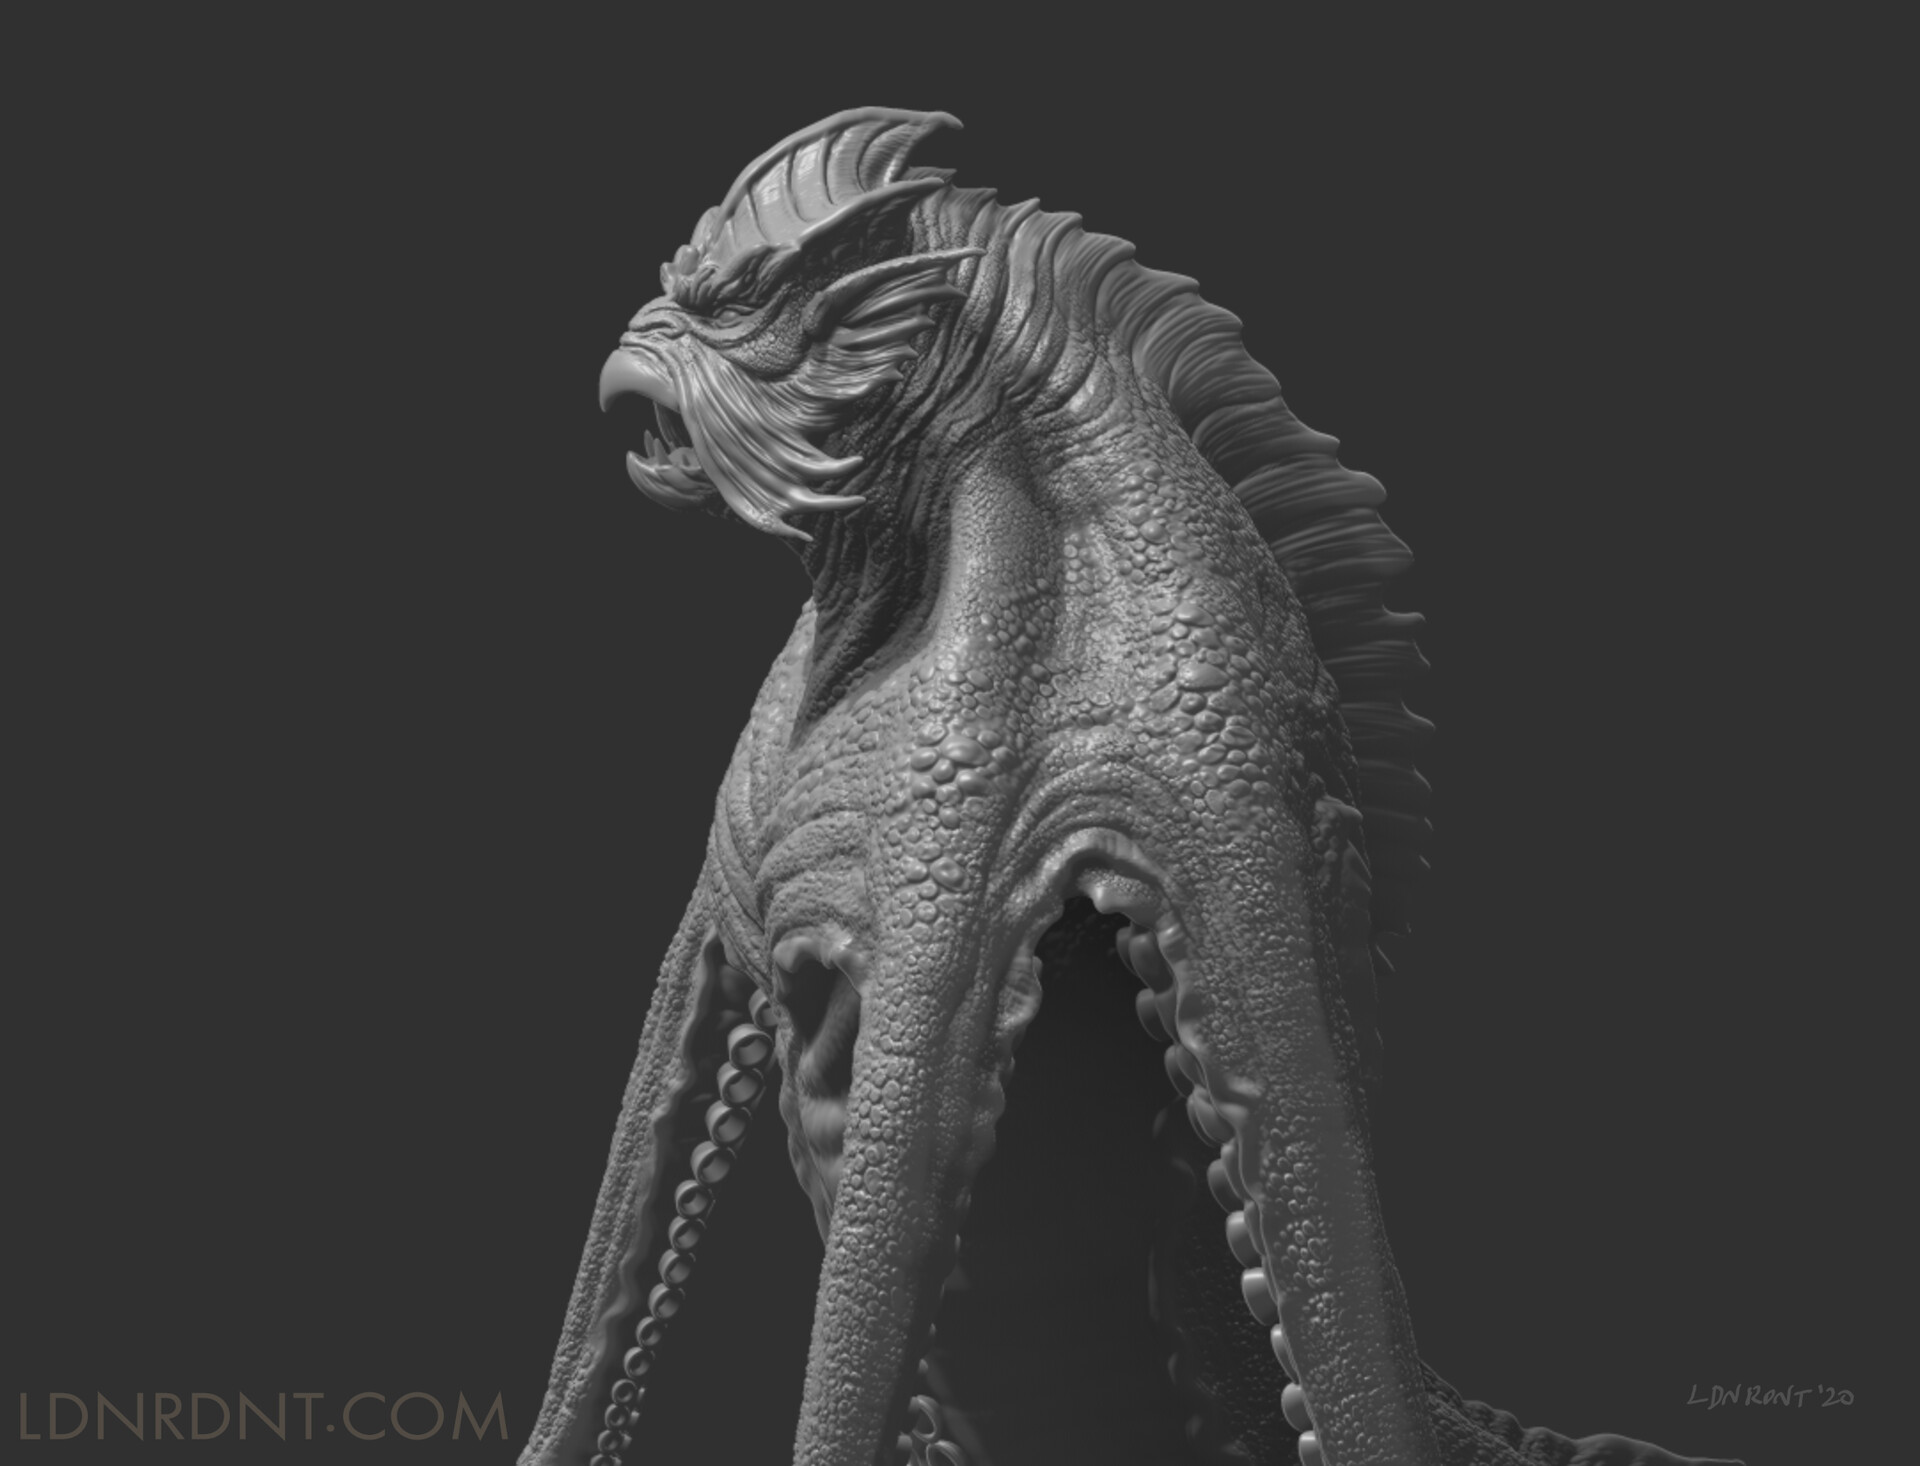 Elden Ardiente on X: Release the Kraken! Based on Ray Harryhausen's design  from the 1981 film Clash of the Titans. Sculpted and painted in ZBrush,  rendered in Keyshot and post work in